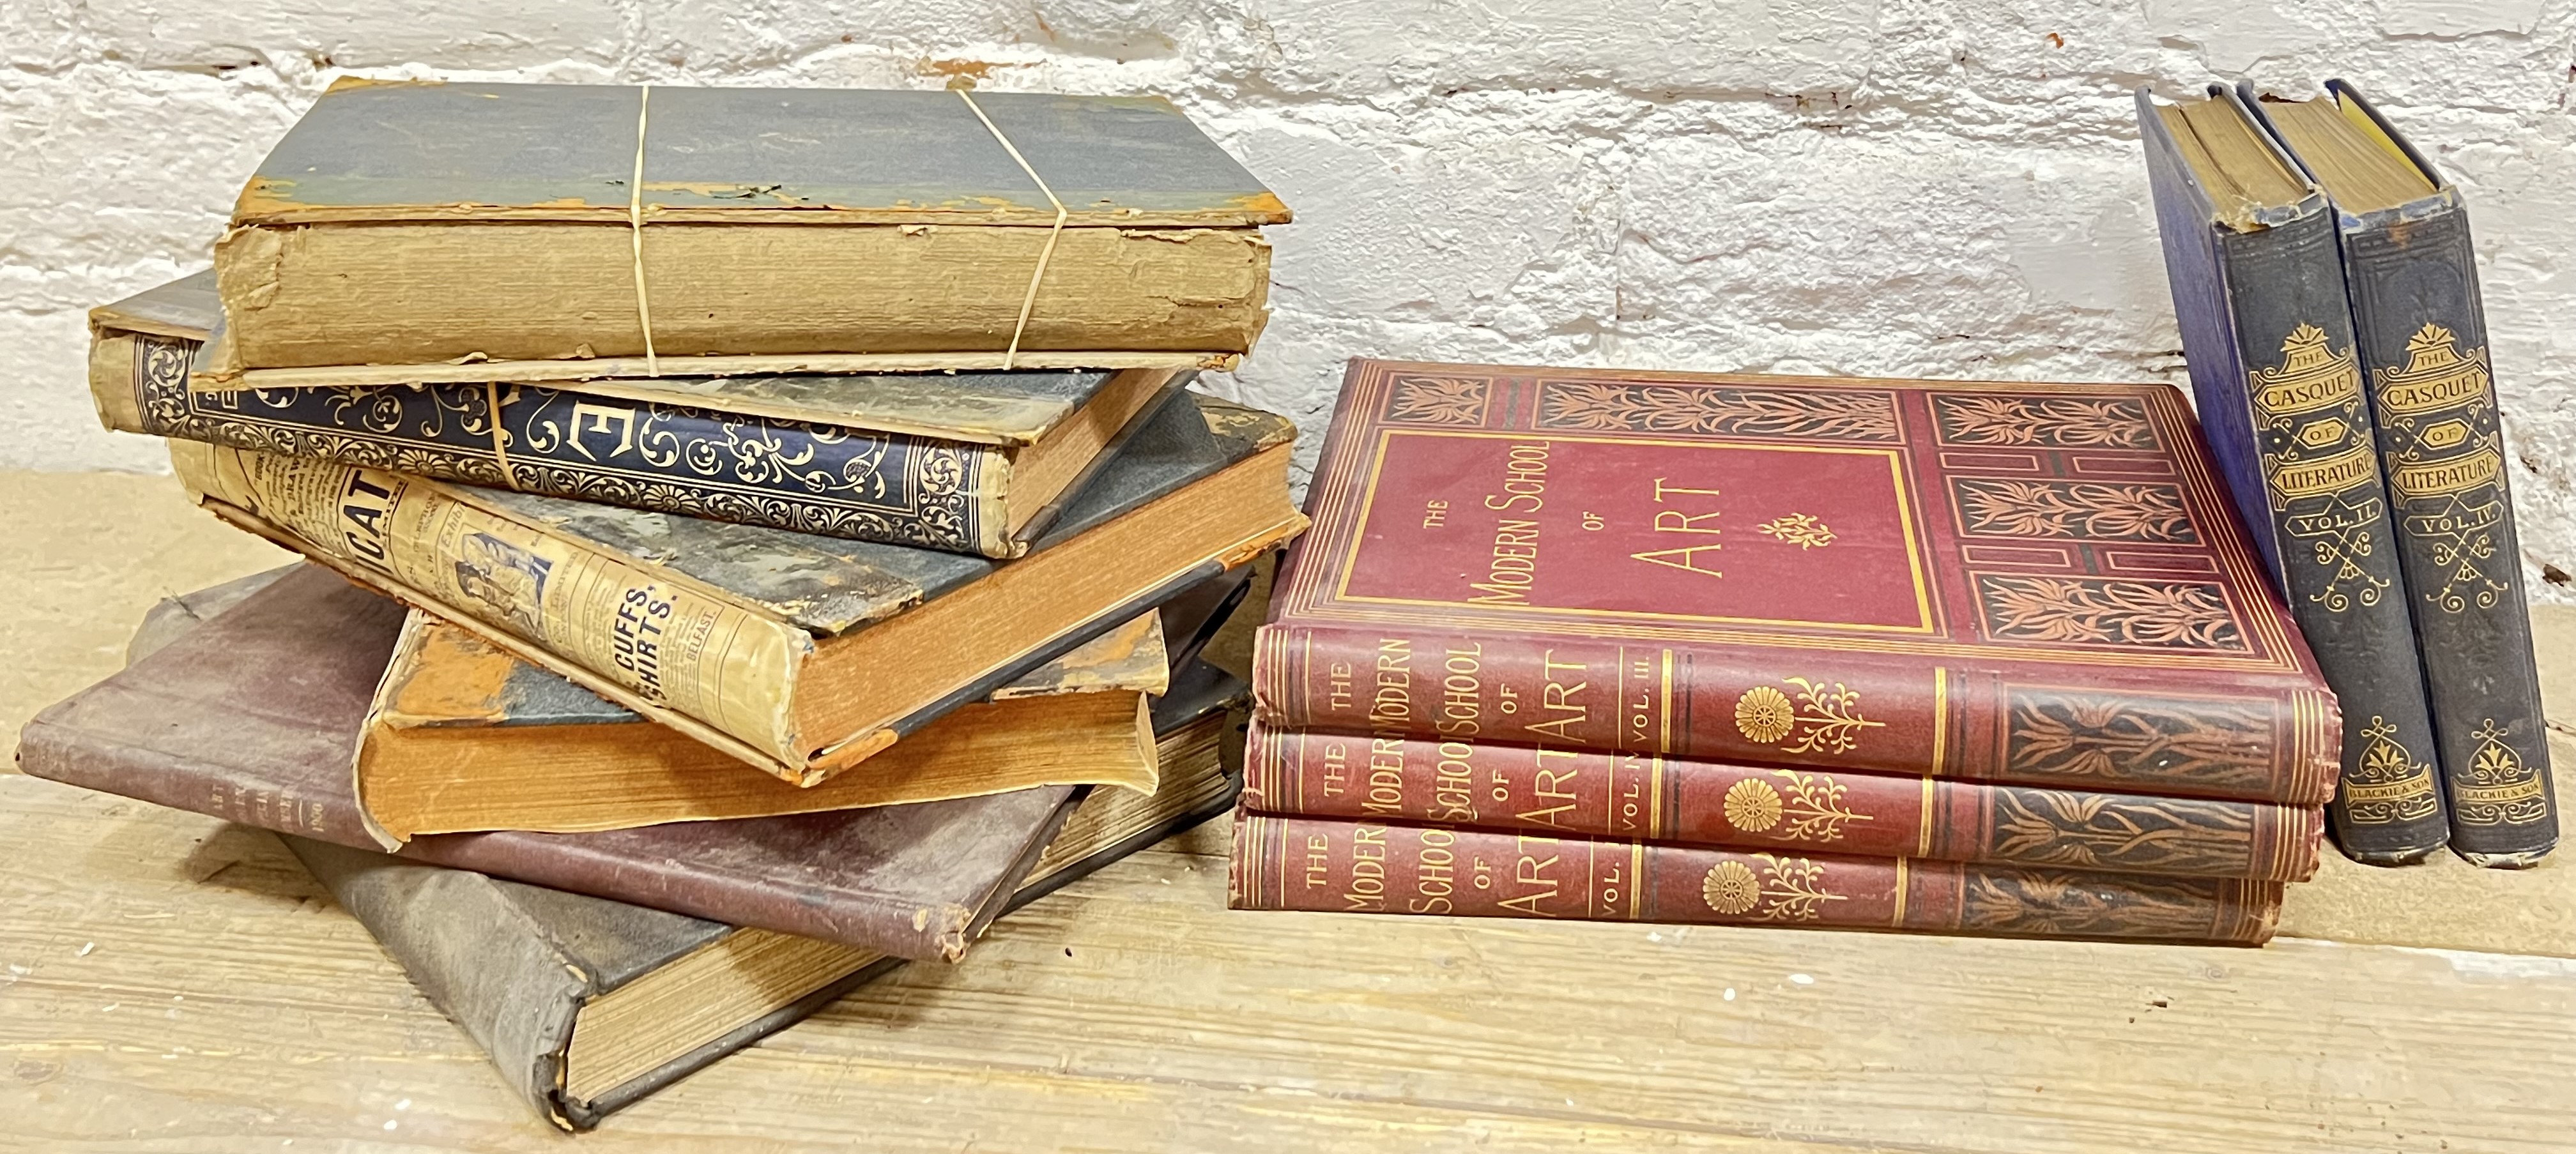 A quantity of vintage and antique books including several leather bound Victorian manuscripts